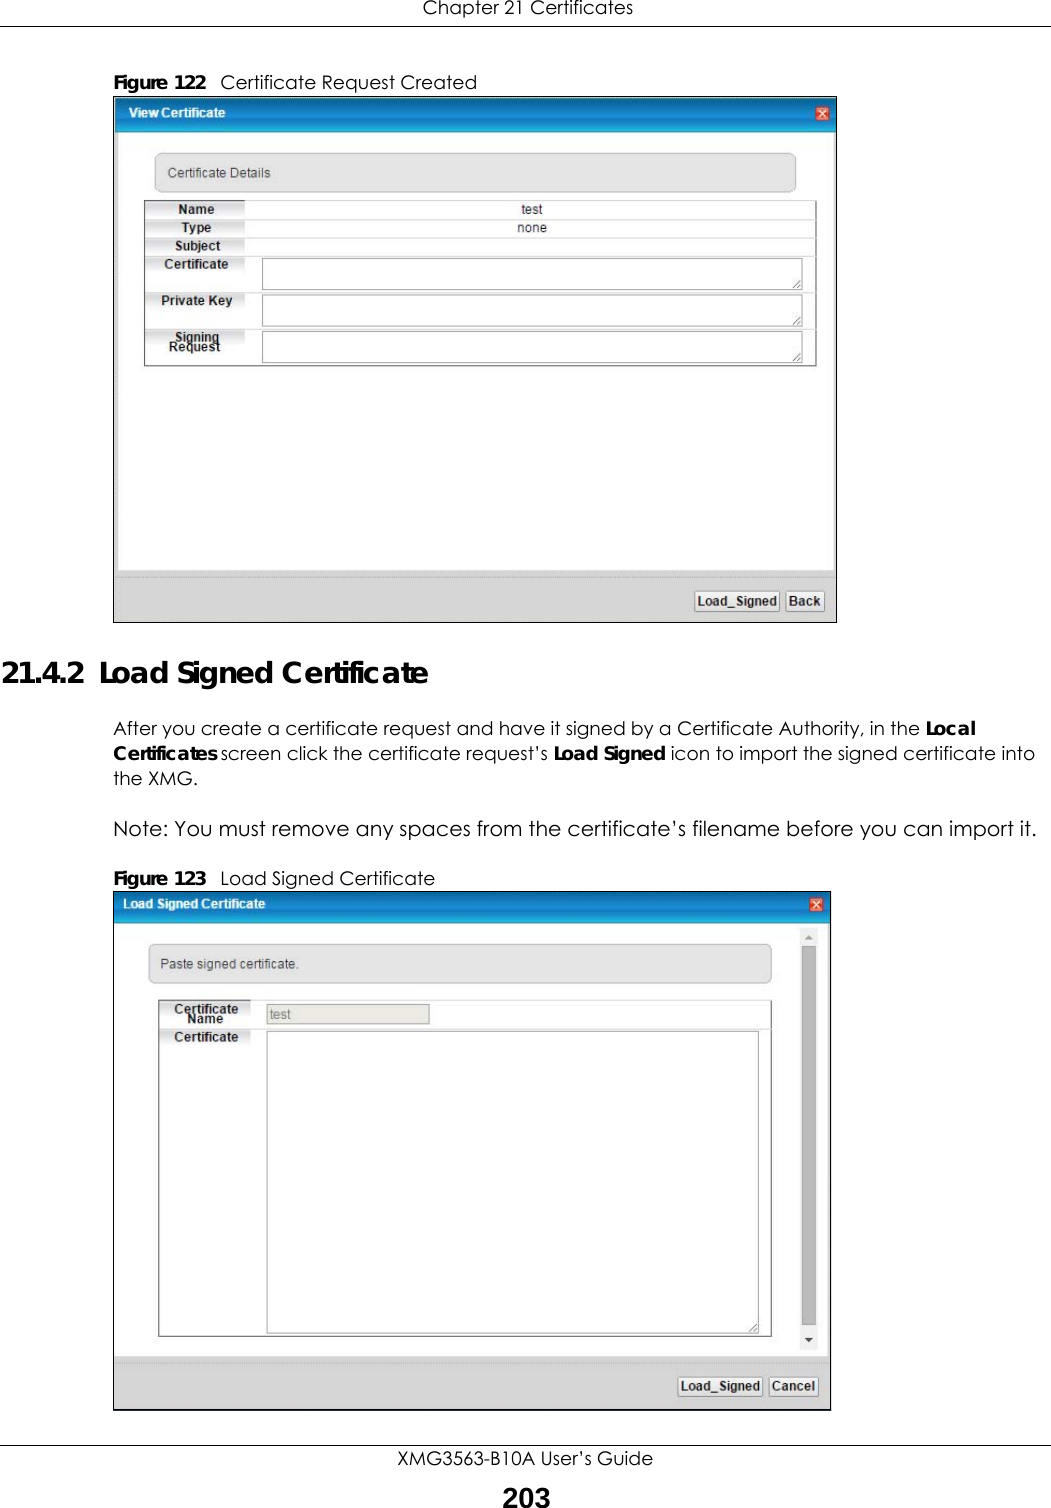  Chapter 21 CertificatesXMG3563-B10A User’s Guide203Figure 122   Certificate Request Created21.4.2  Load Signed Certificate After you create a certificate request and have it signed by a Certificate Authority, in the Local Certificates screen click the certificate request’s Load Signed icon to import the signed certificate into the XMG. Note: You must remove any spaces from the certificate’s filename before you can import it.Figure 123   Load Signed Certificate 